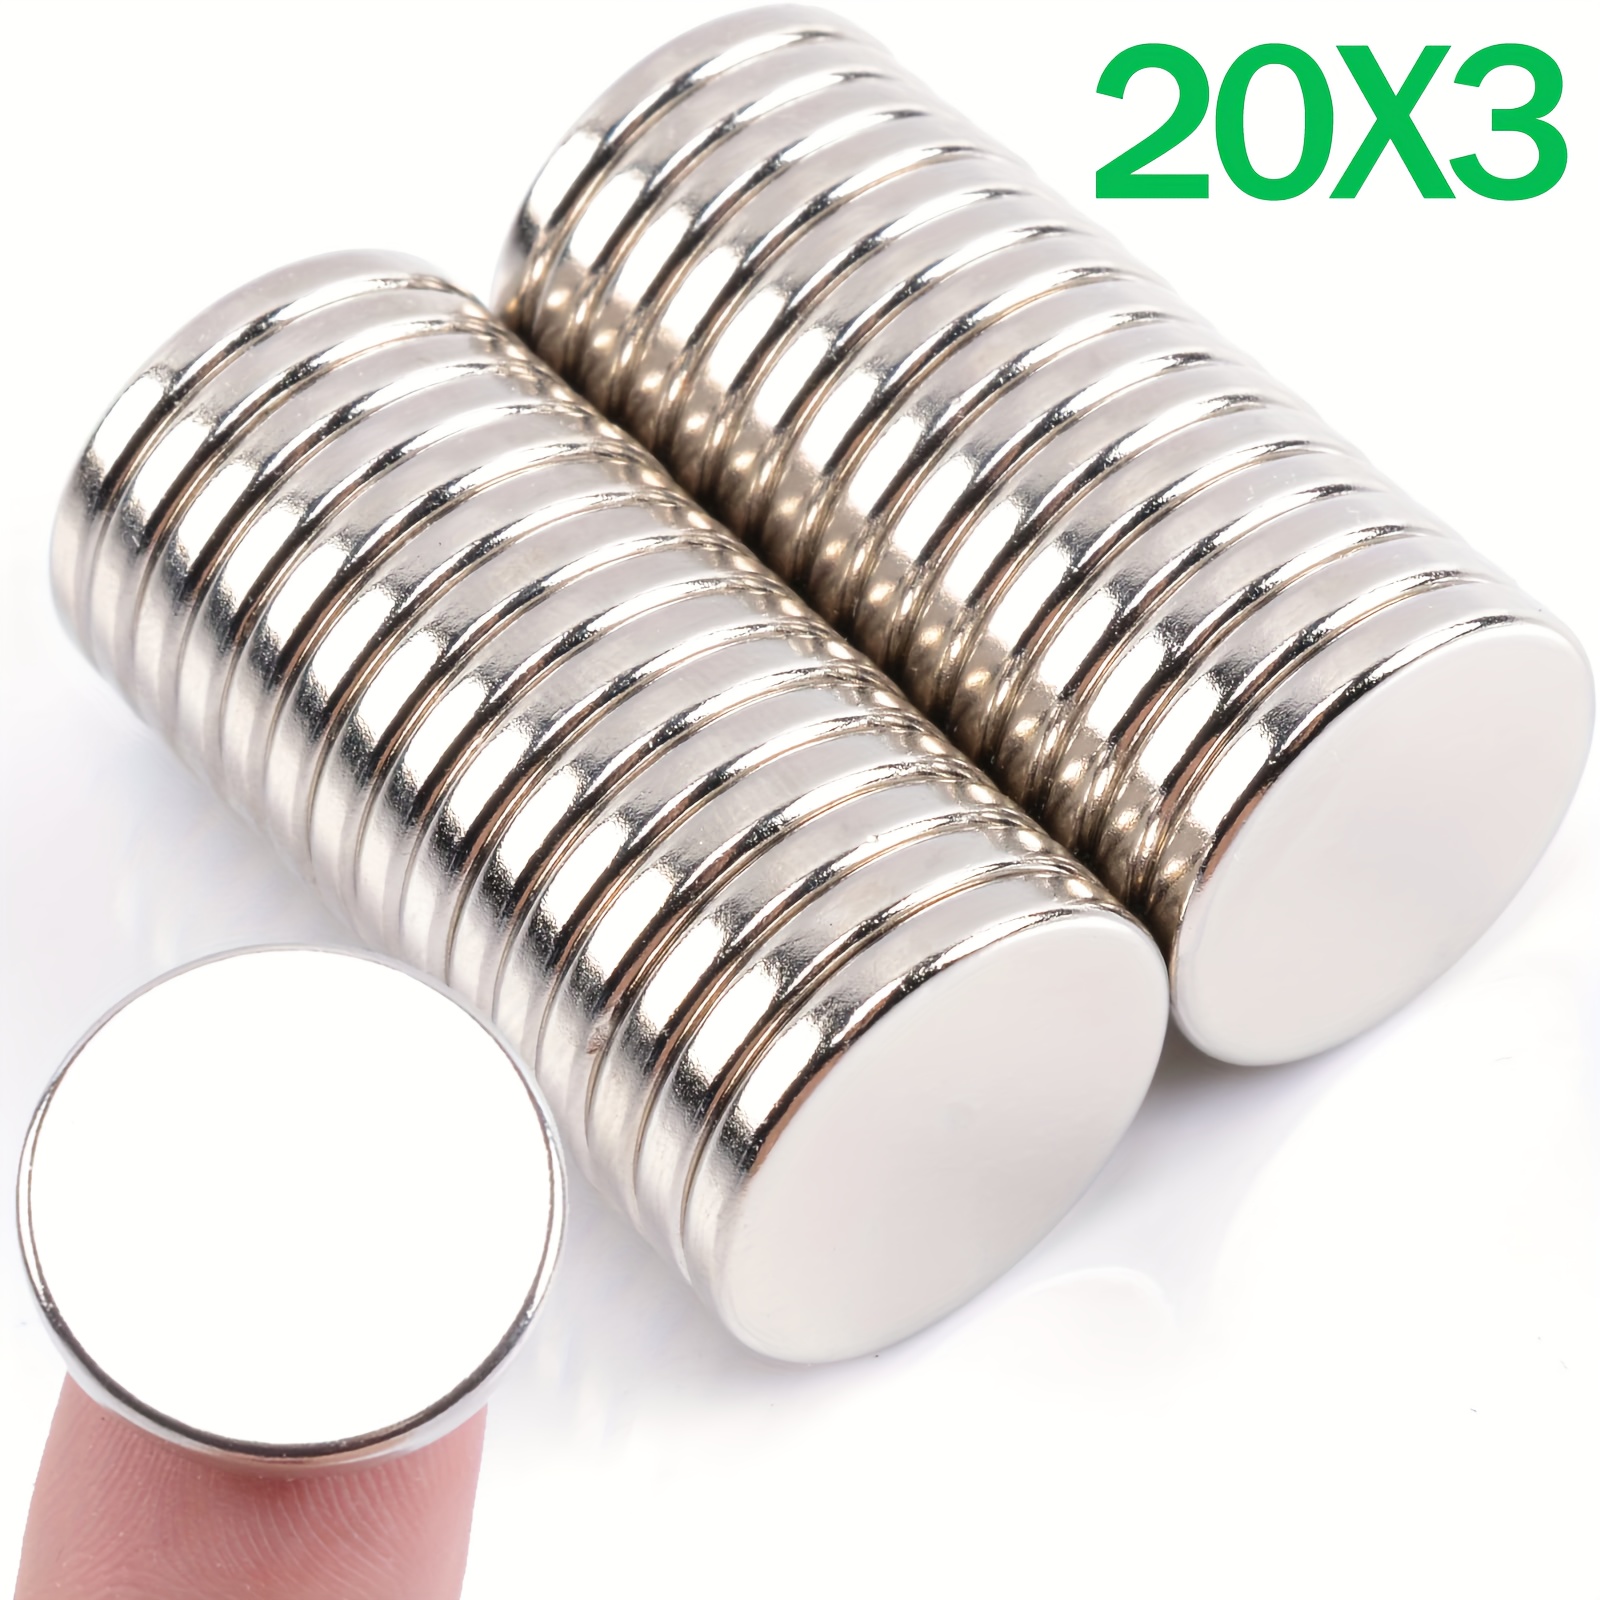 10 30pcs small magnets neodymium magnet rare earth magnets strong thin magnets 3x20mmround durable small magnets for fridge whiteboards crafts photos stickers postcards tools kitchen accessories